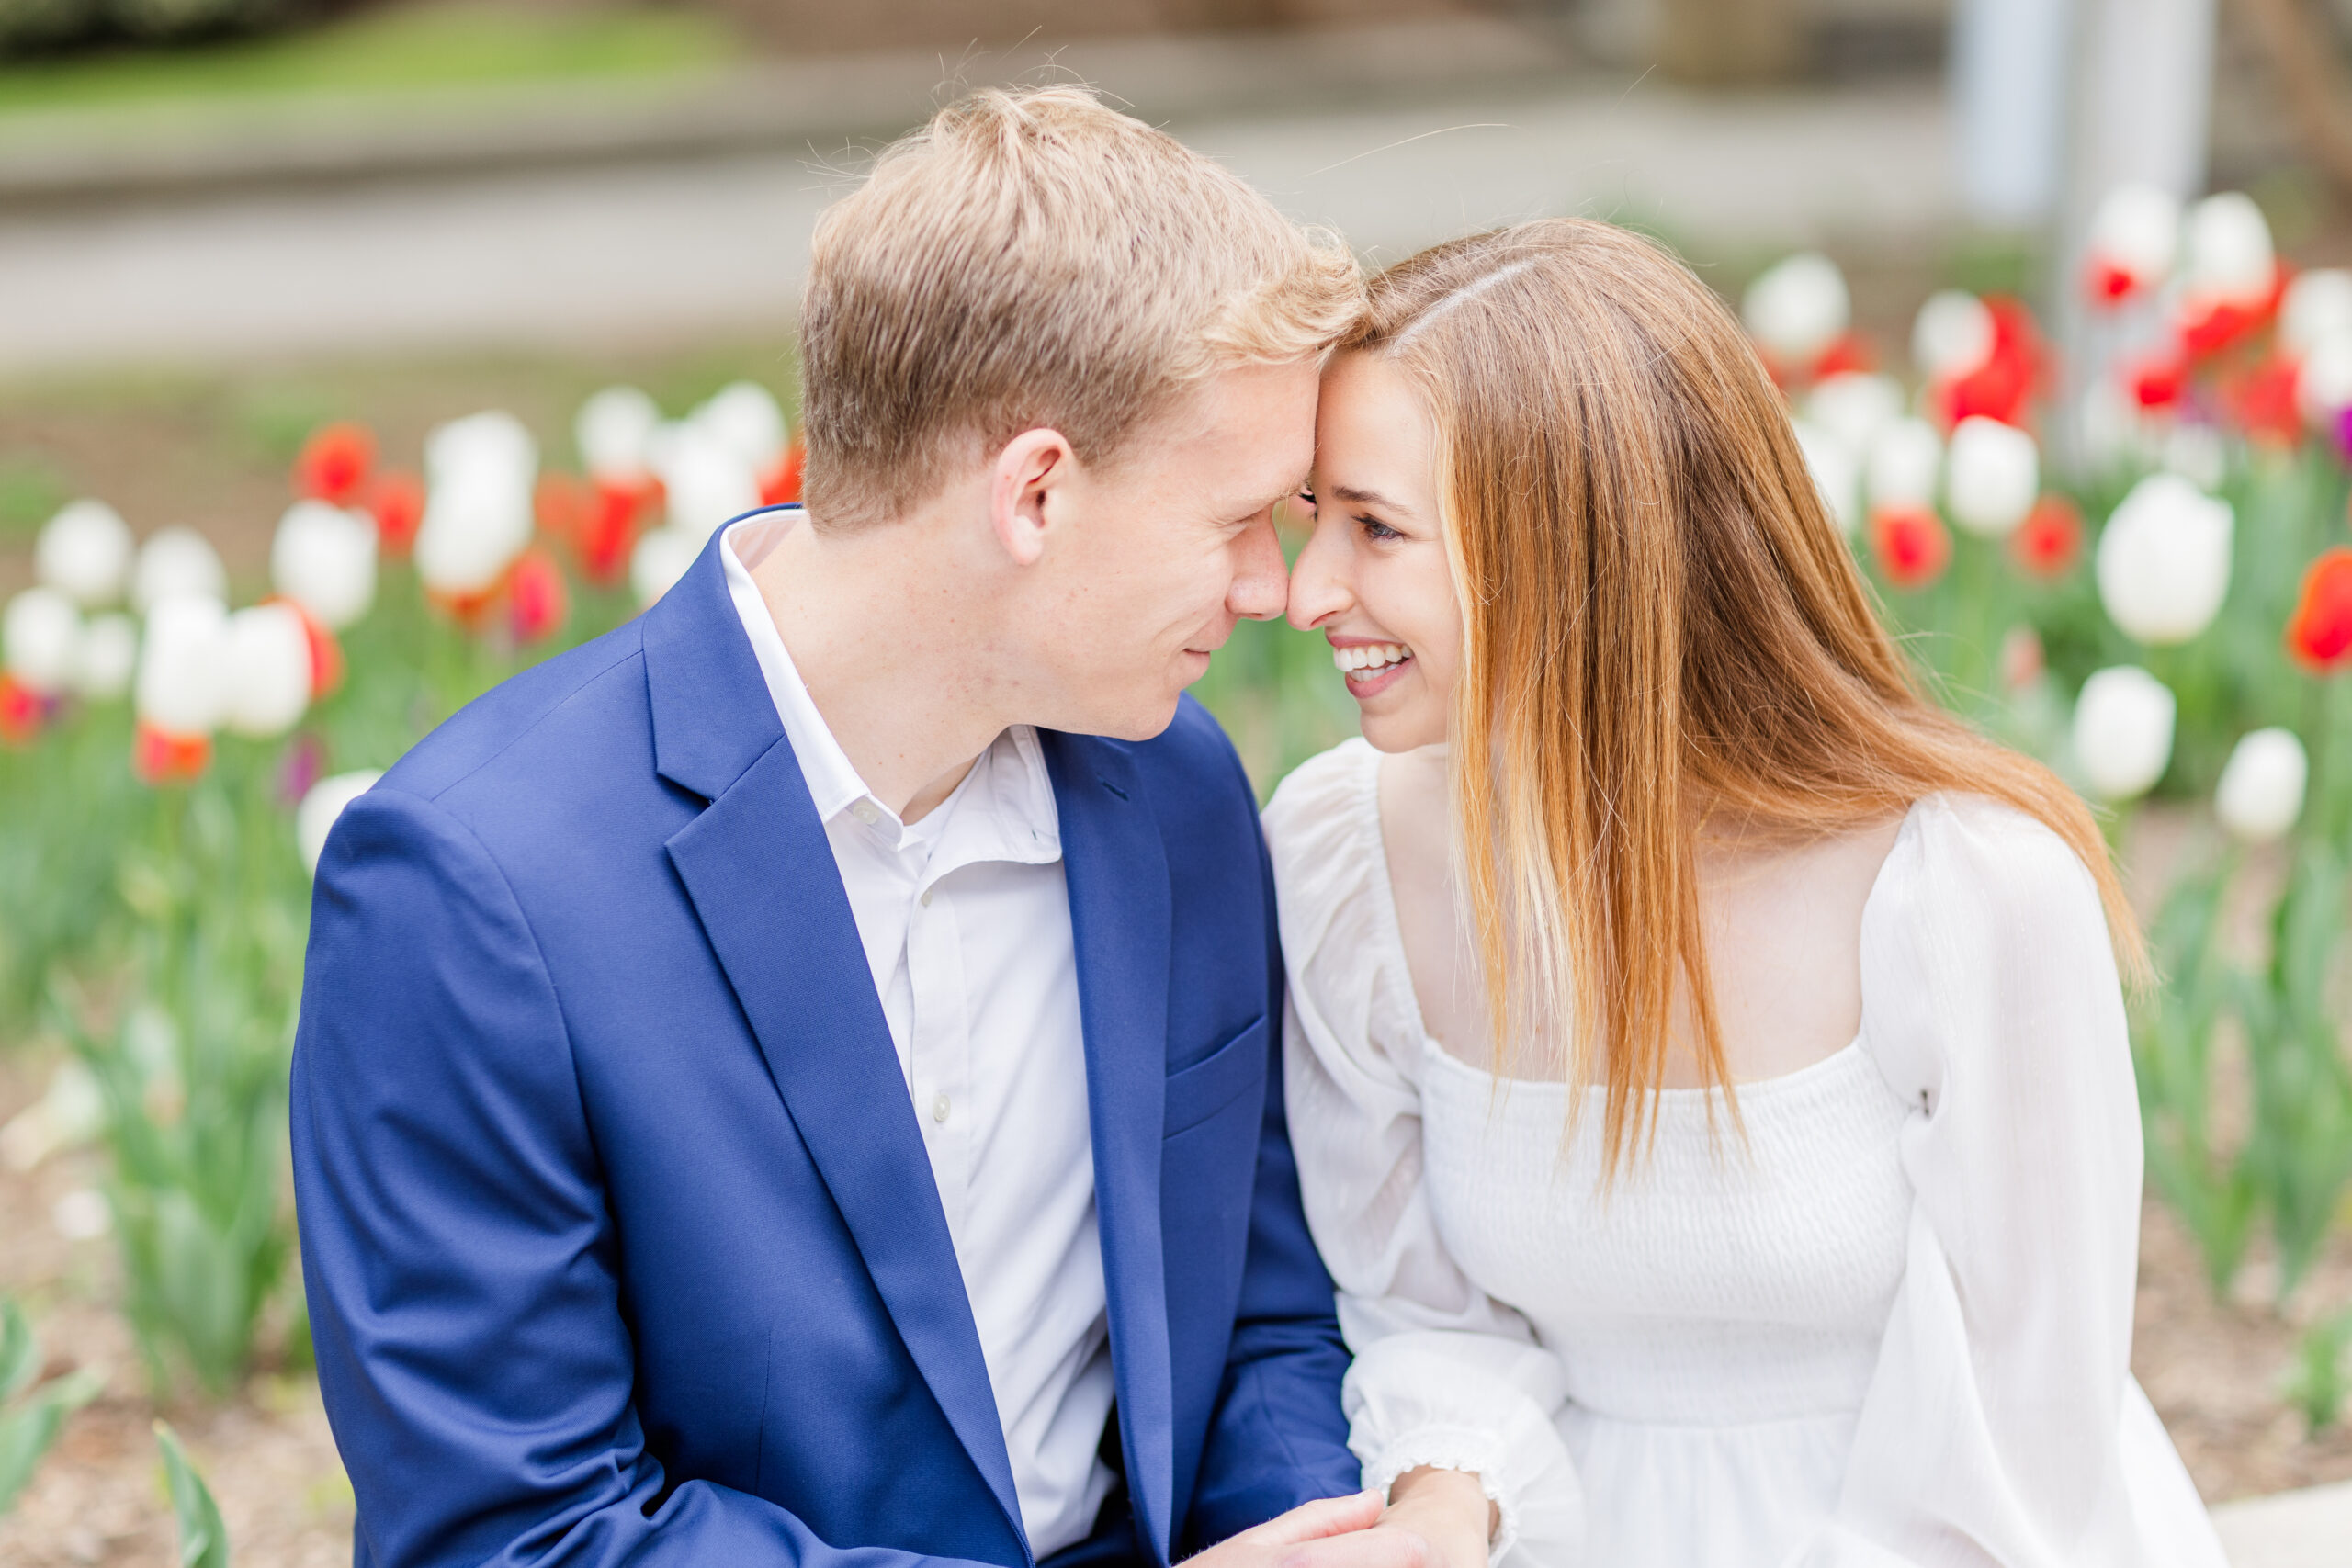 engaged couple laughing at each other with tulips in background